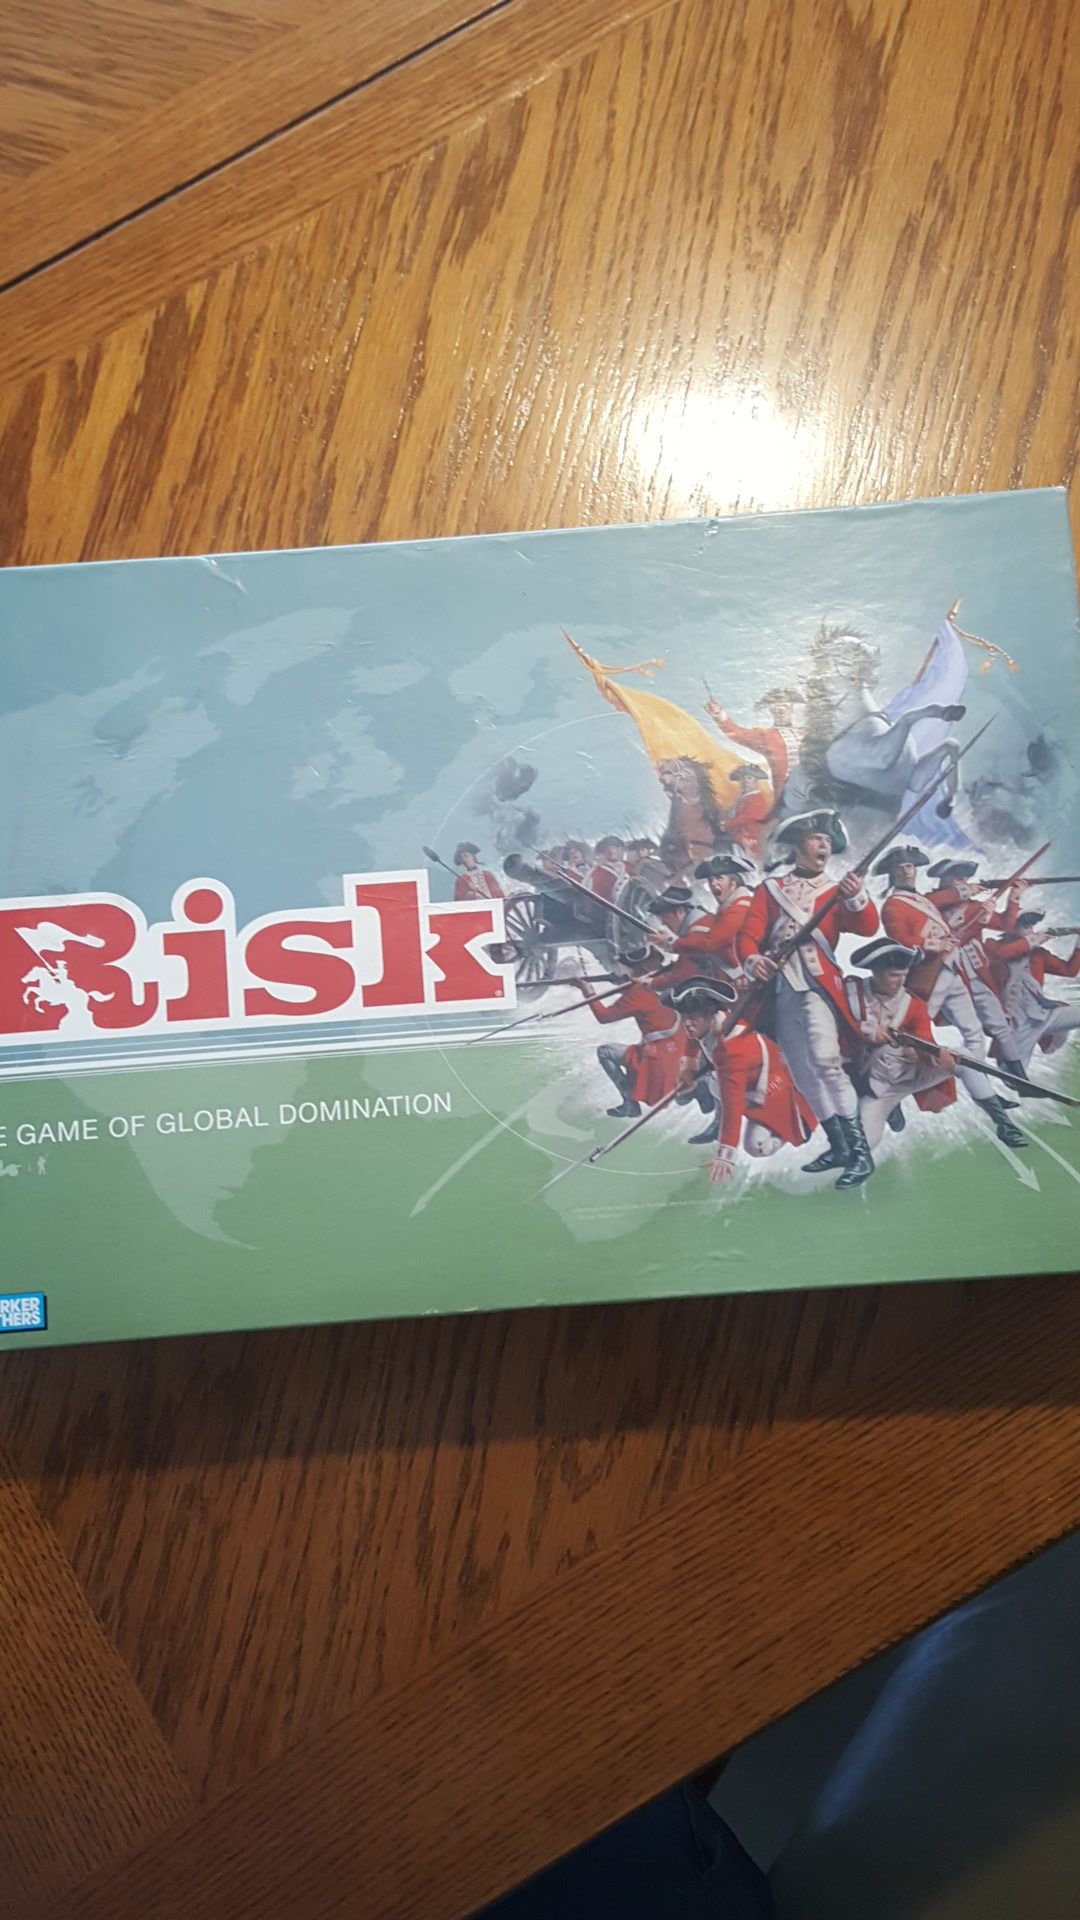 Game of Risk